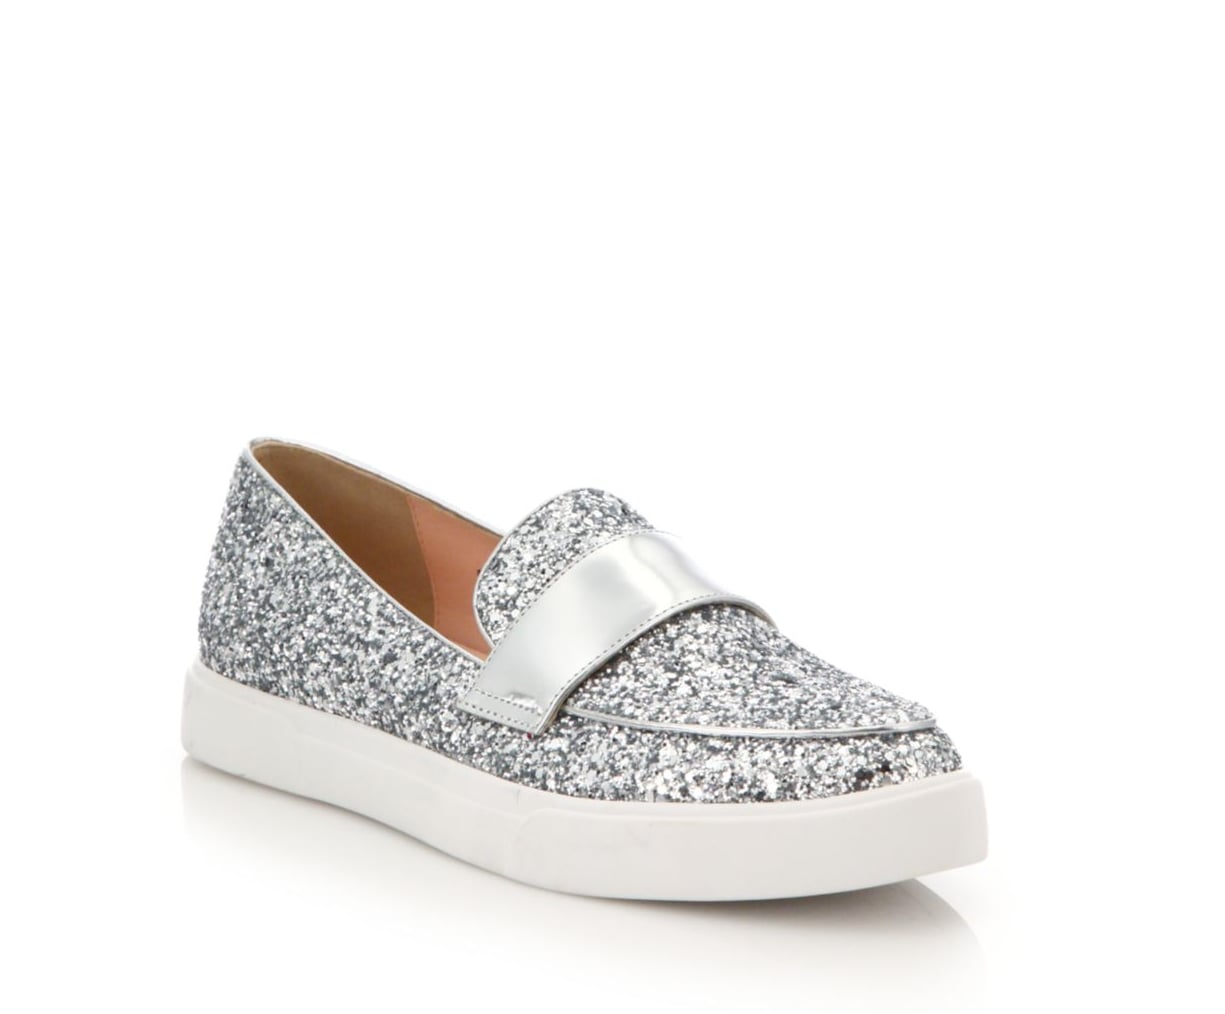 Kate Spade Clover Glittered Leather Slip-On Sneakers ($198) | 40+ Shoes For  the Bride Who Wants (and Deserves!) to Be Comfortable | POPSUGAR Fashion  Photo 33